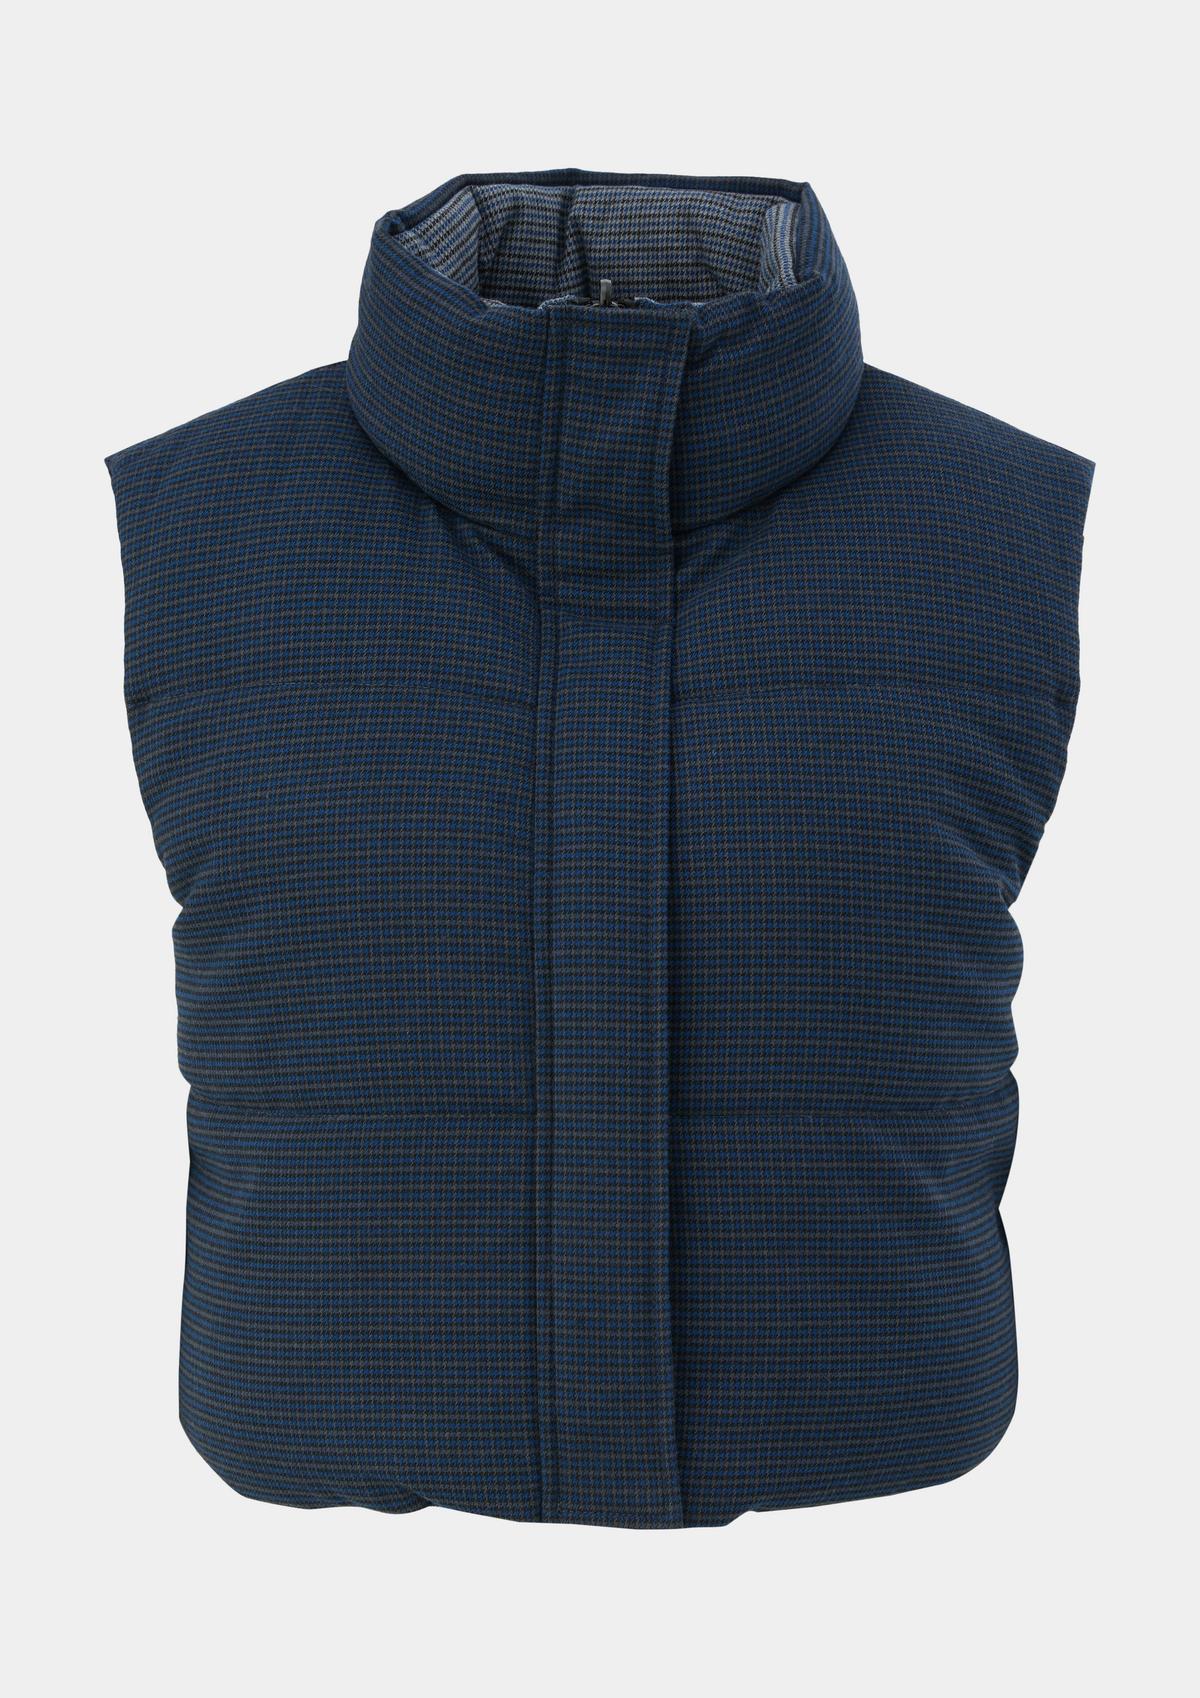 s.Oliver Reversible waistcoat with a Prince of Wales check pattern